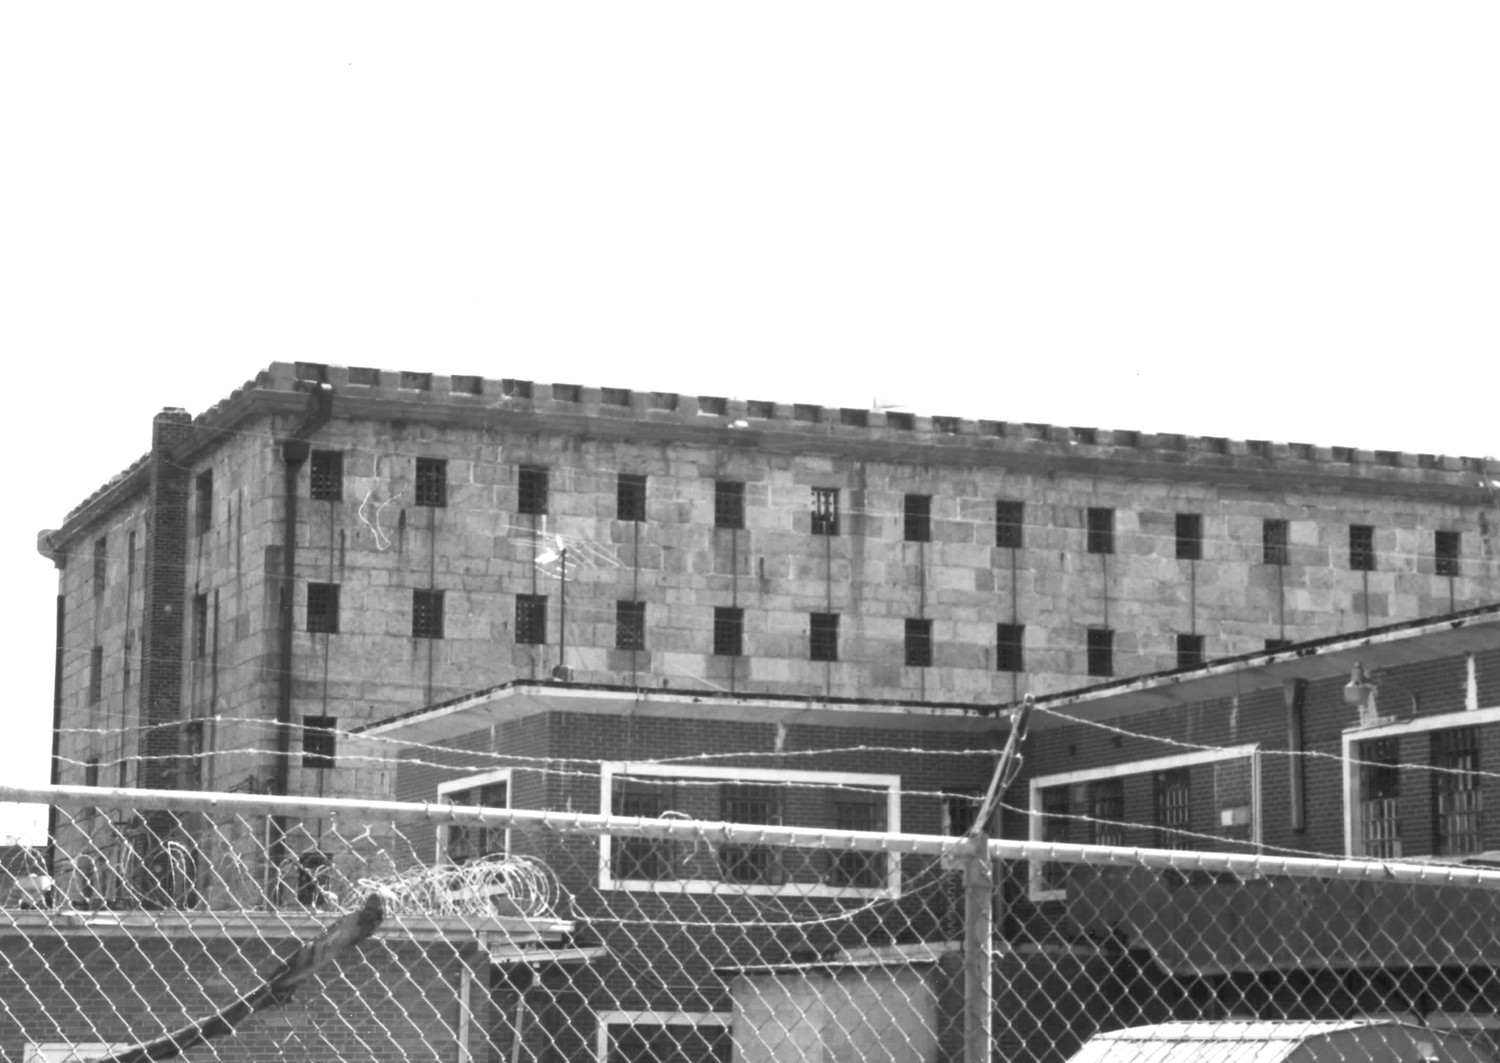 South Carolina Penitentiary - Central Correctional Institution, Columbia South Carolina North and West facades of North Wing Cell Block (1994)